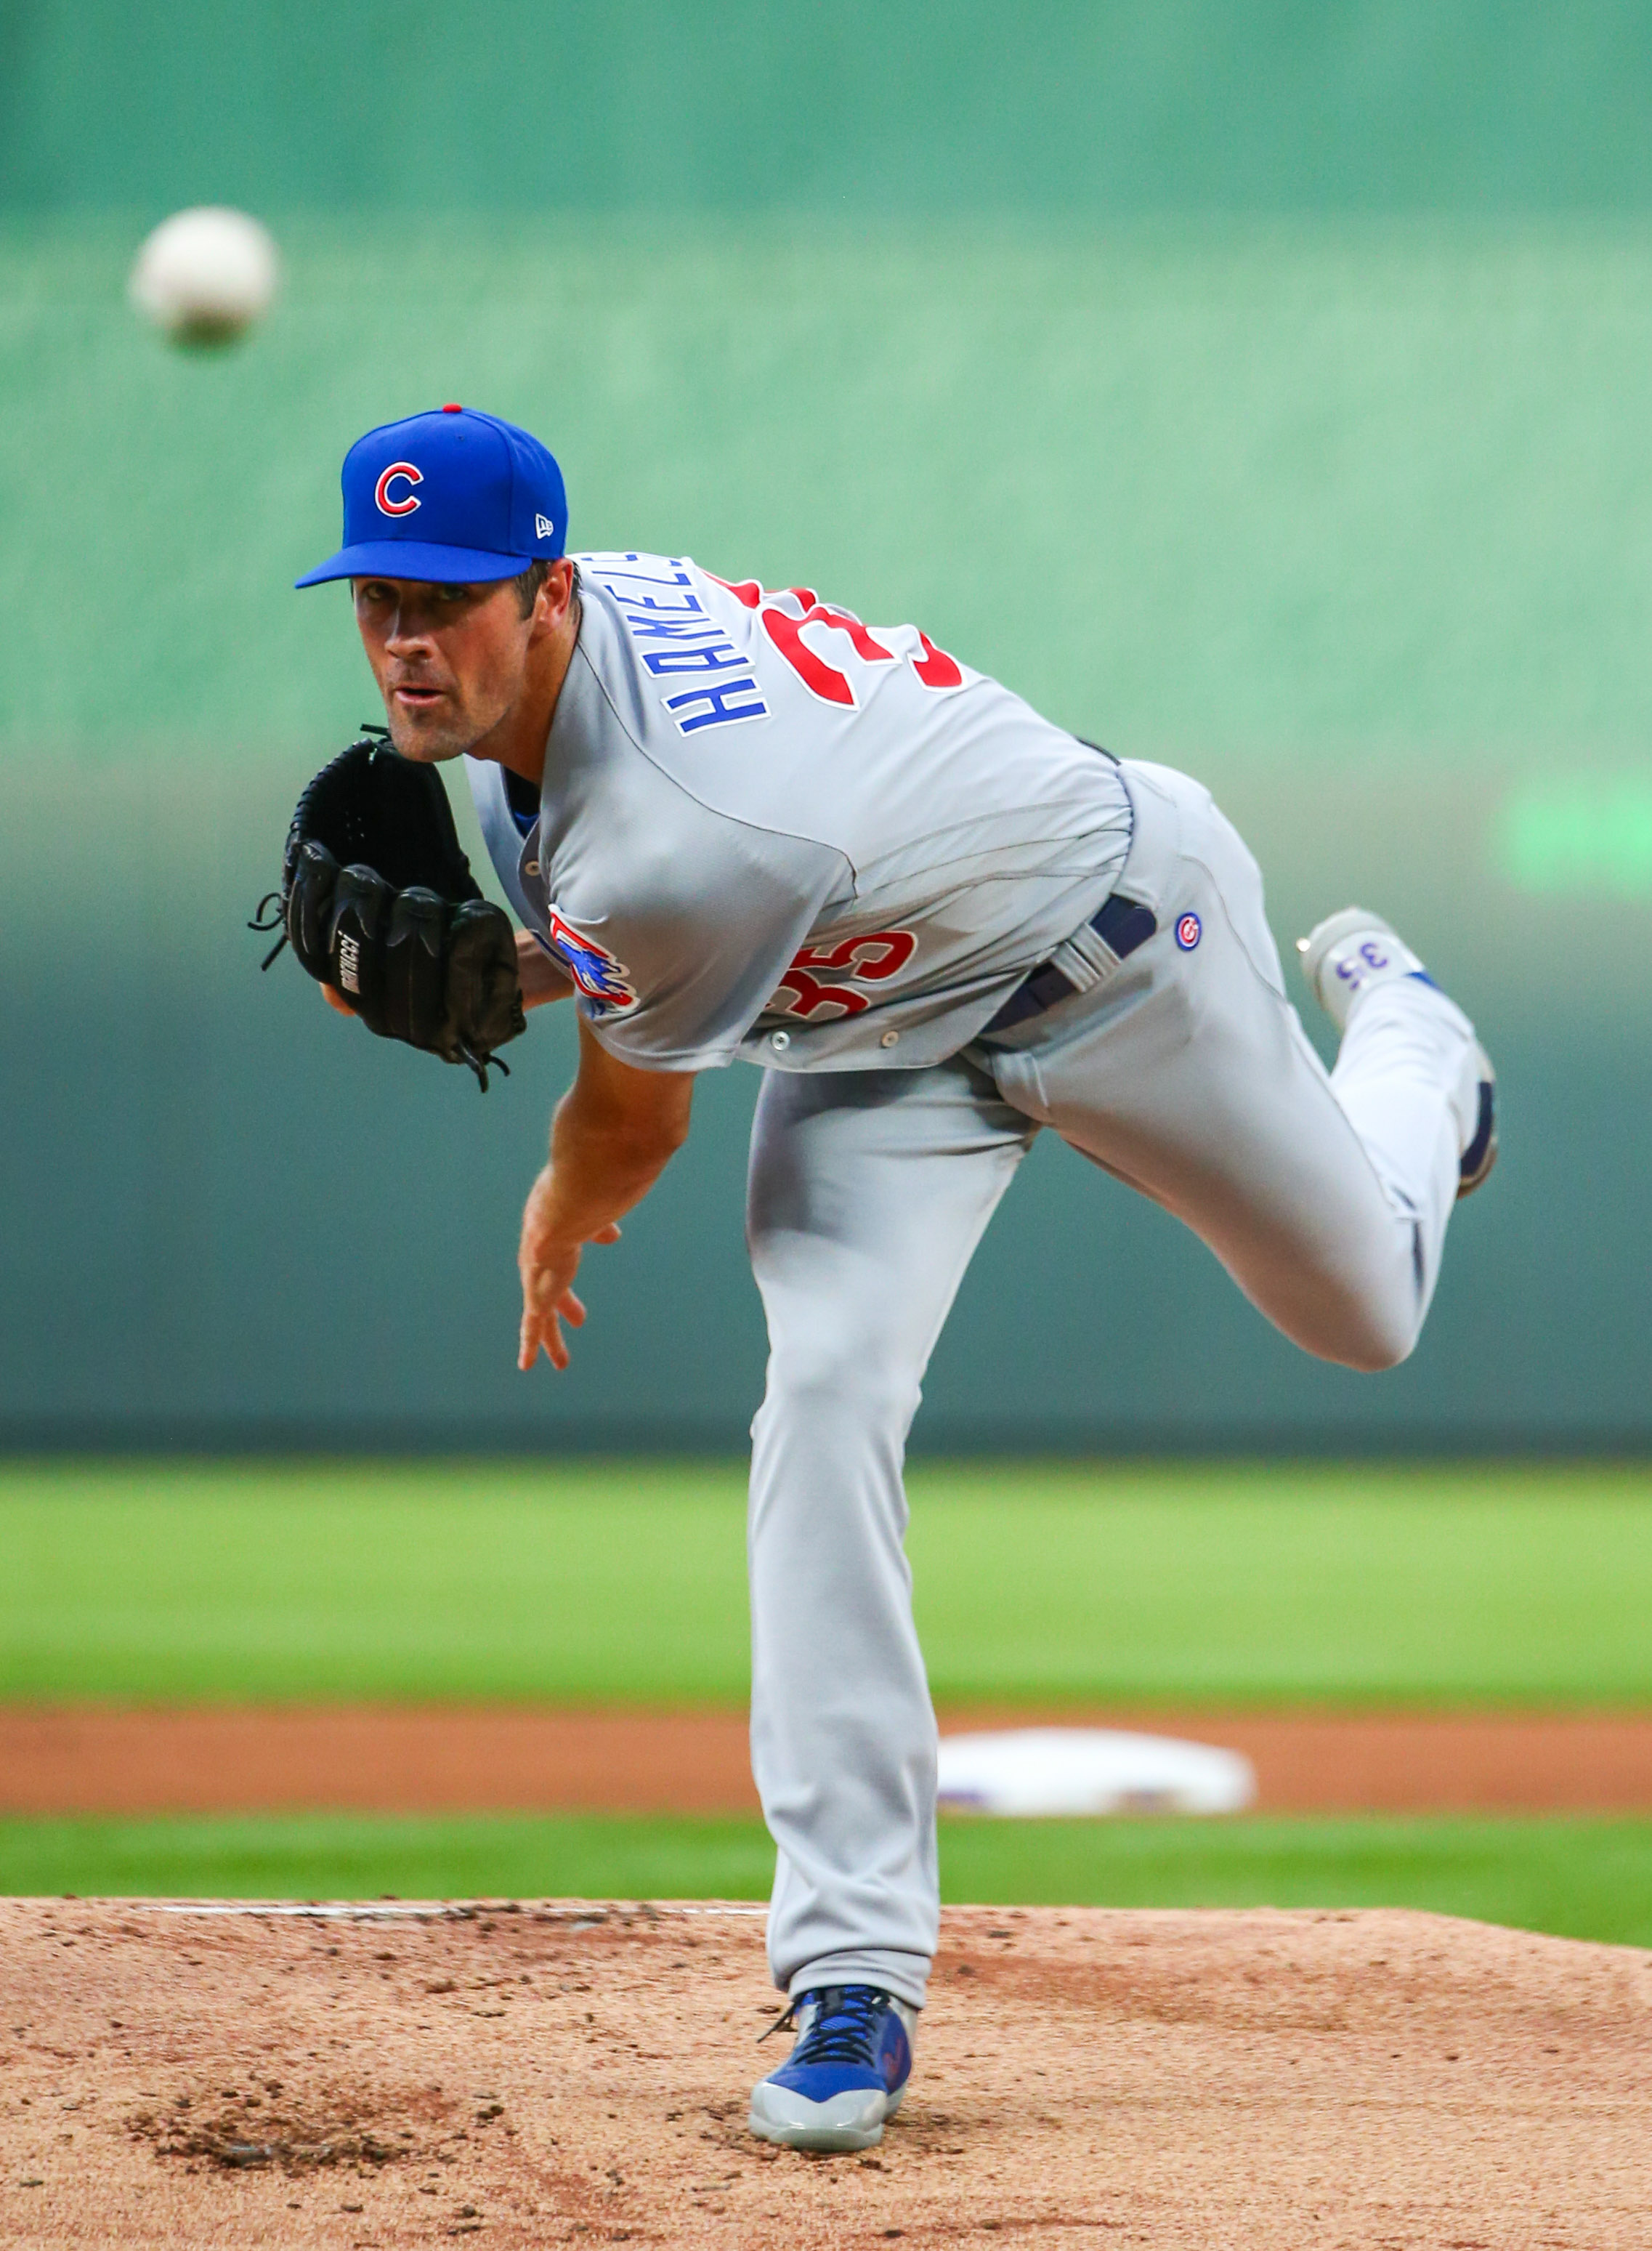 Kyle Hendricks Likely to Have Option Exercised, Homegrown Pitching